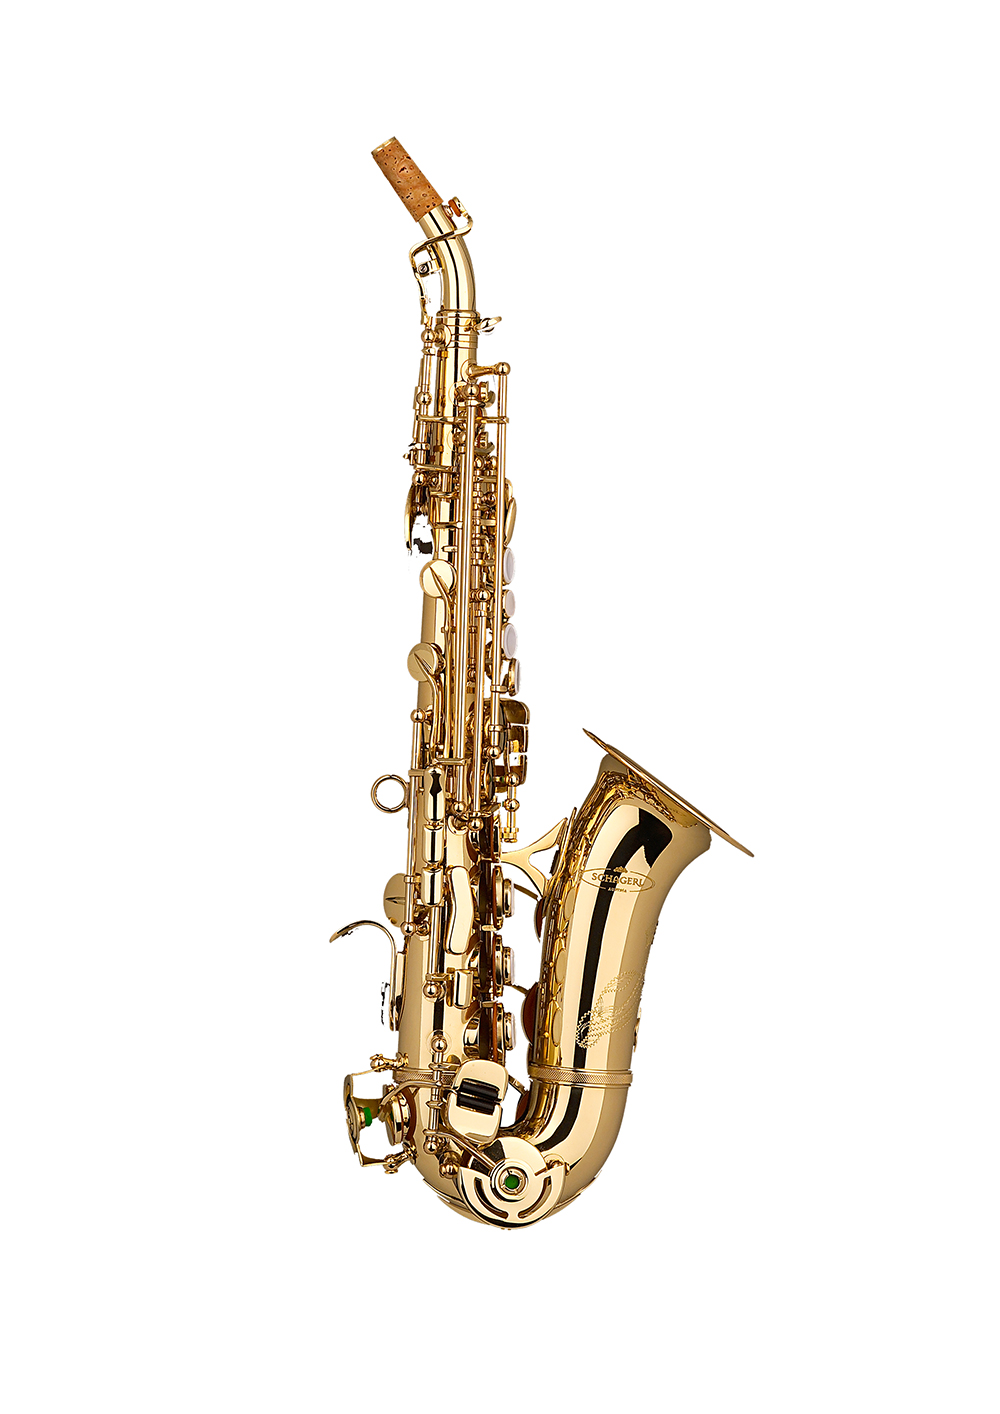 Schagerl Academica Soprano Saxophone SC-600L, curved